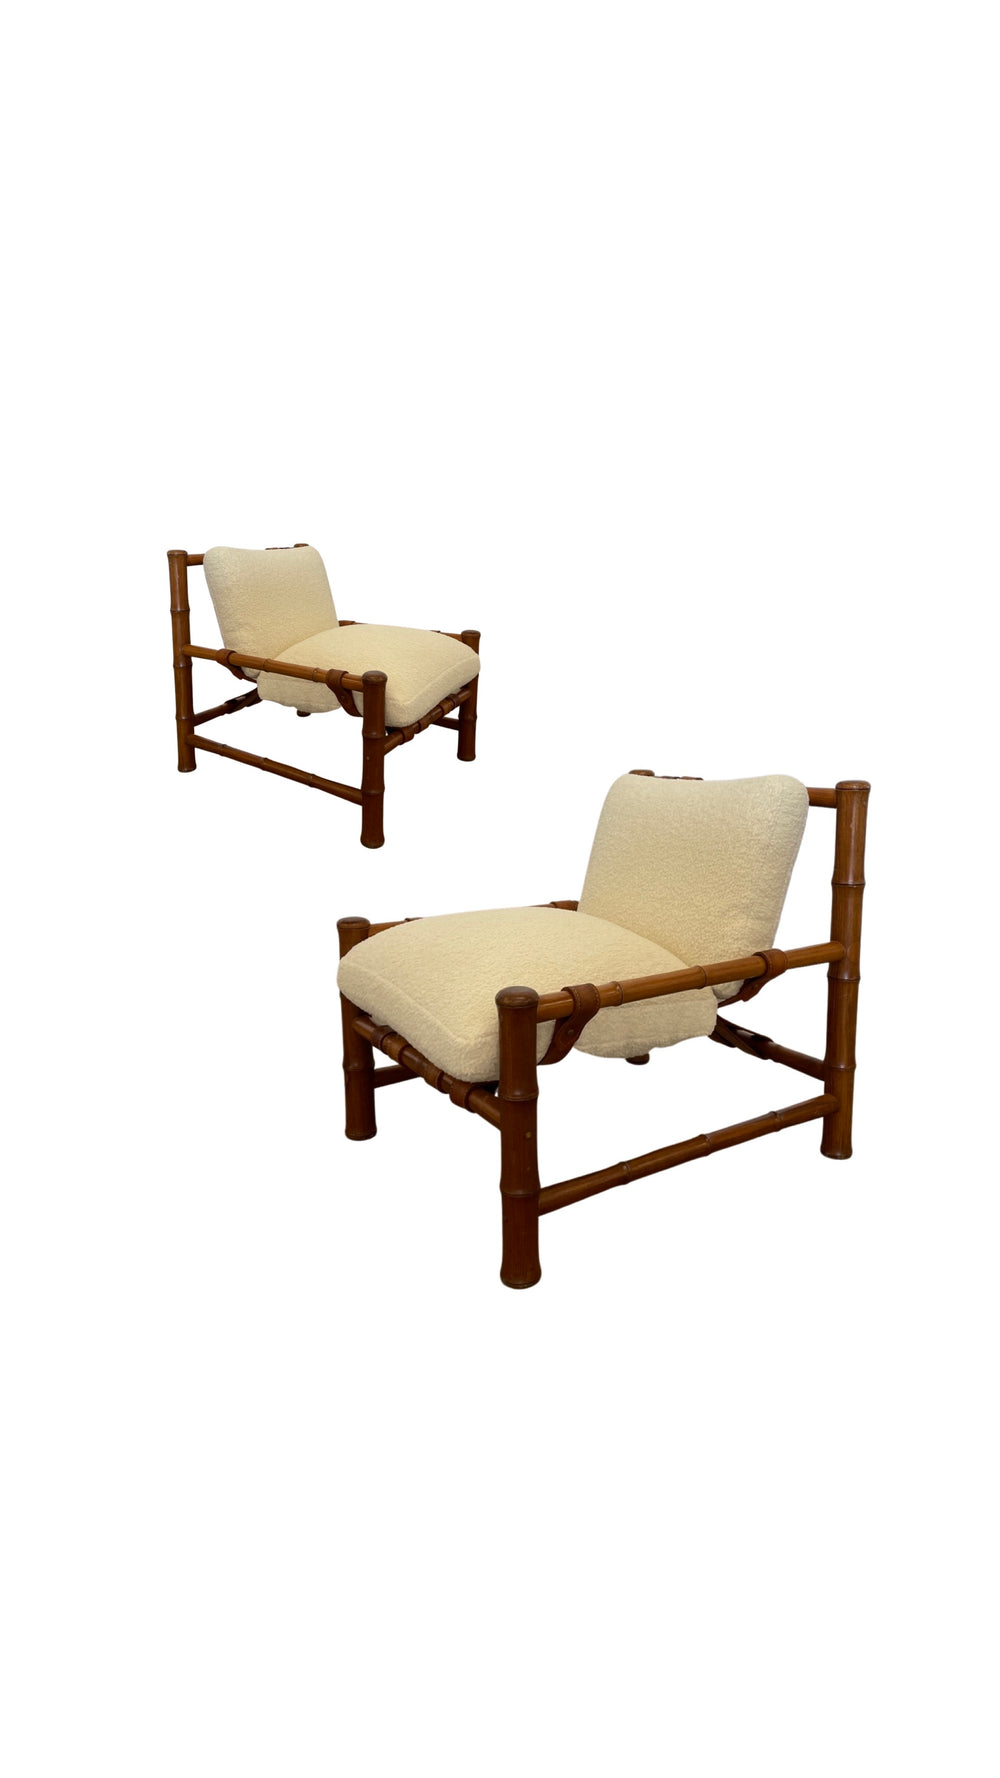 Asko Finland sadle leather and wood sling lounge chairs with Alpaca cushions